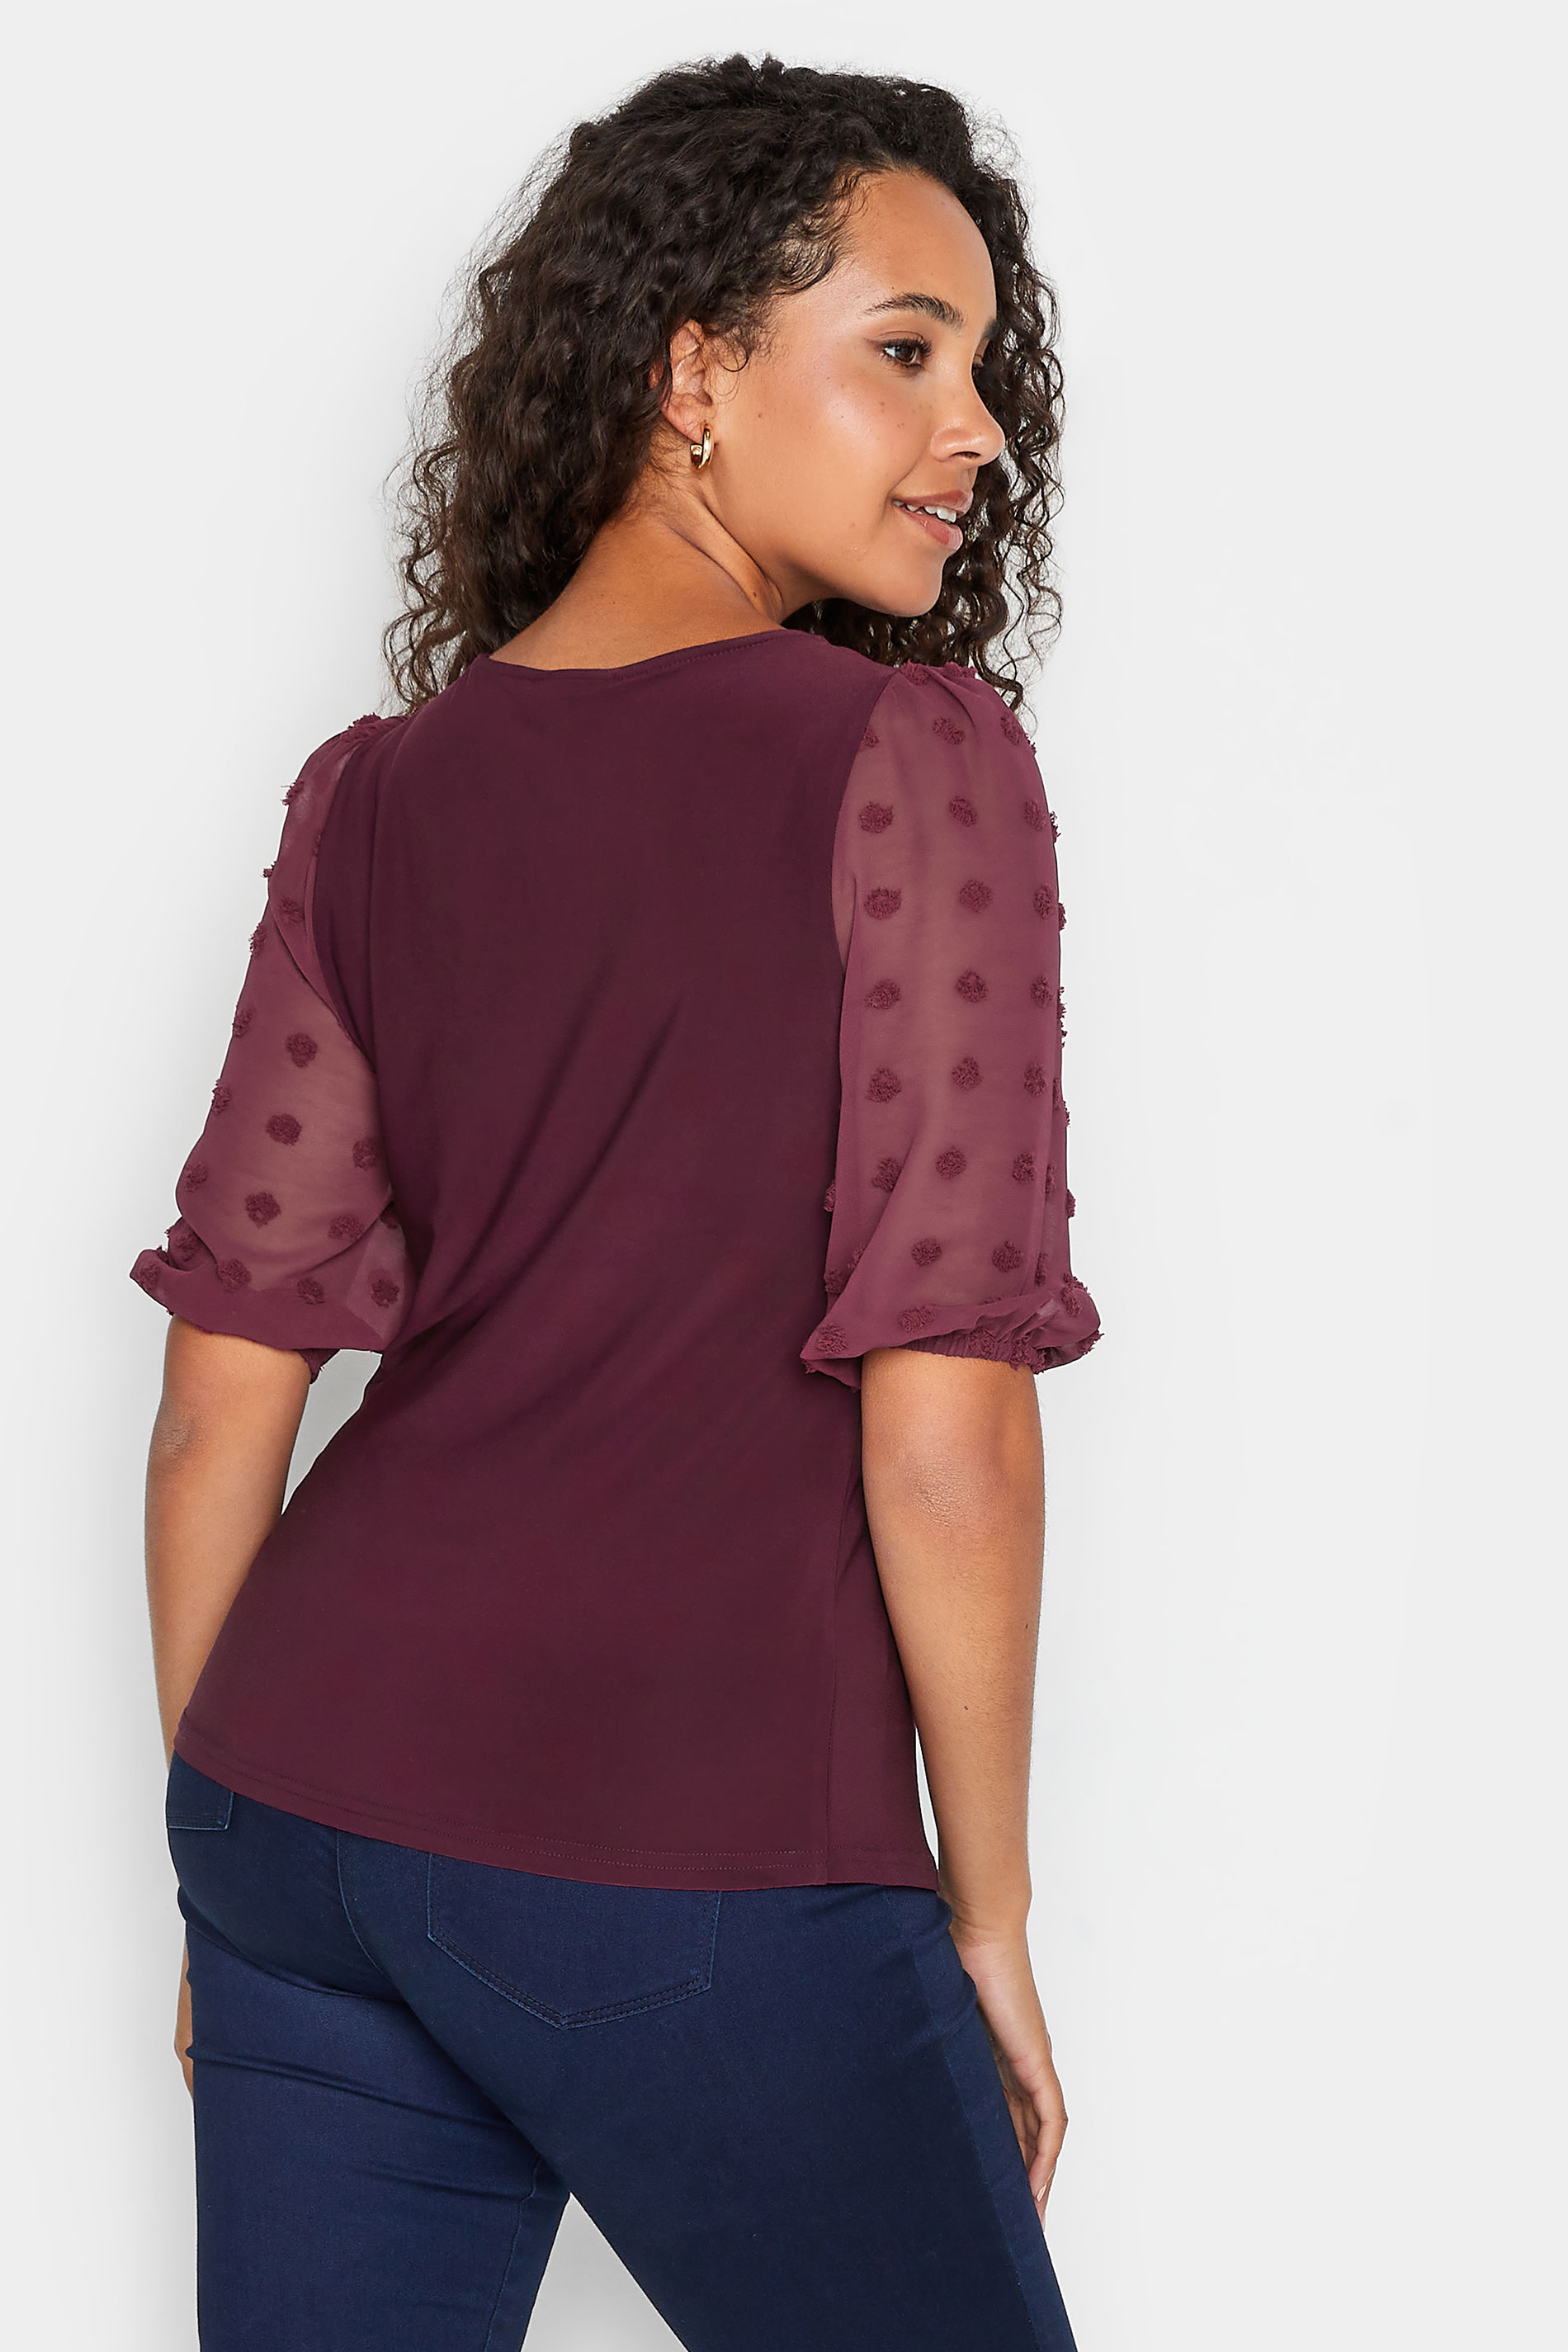 M&Co Burgundy Red Dobby Sleeve Blouse | M&Co 3